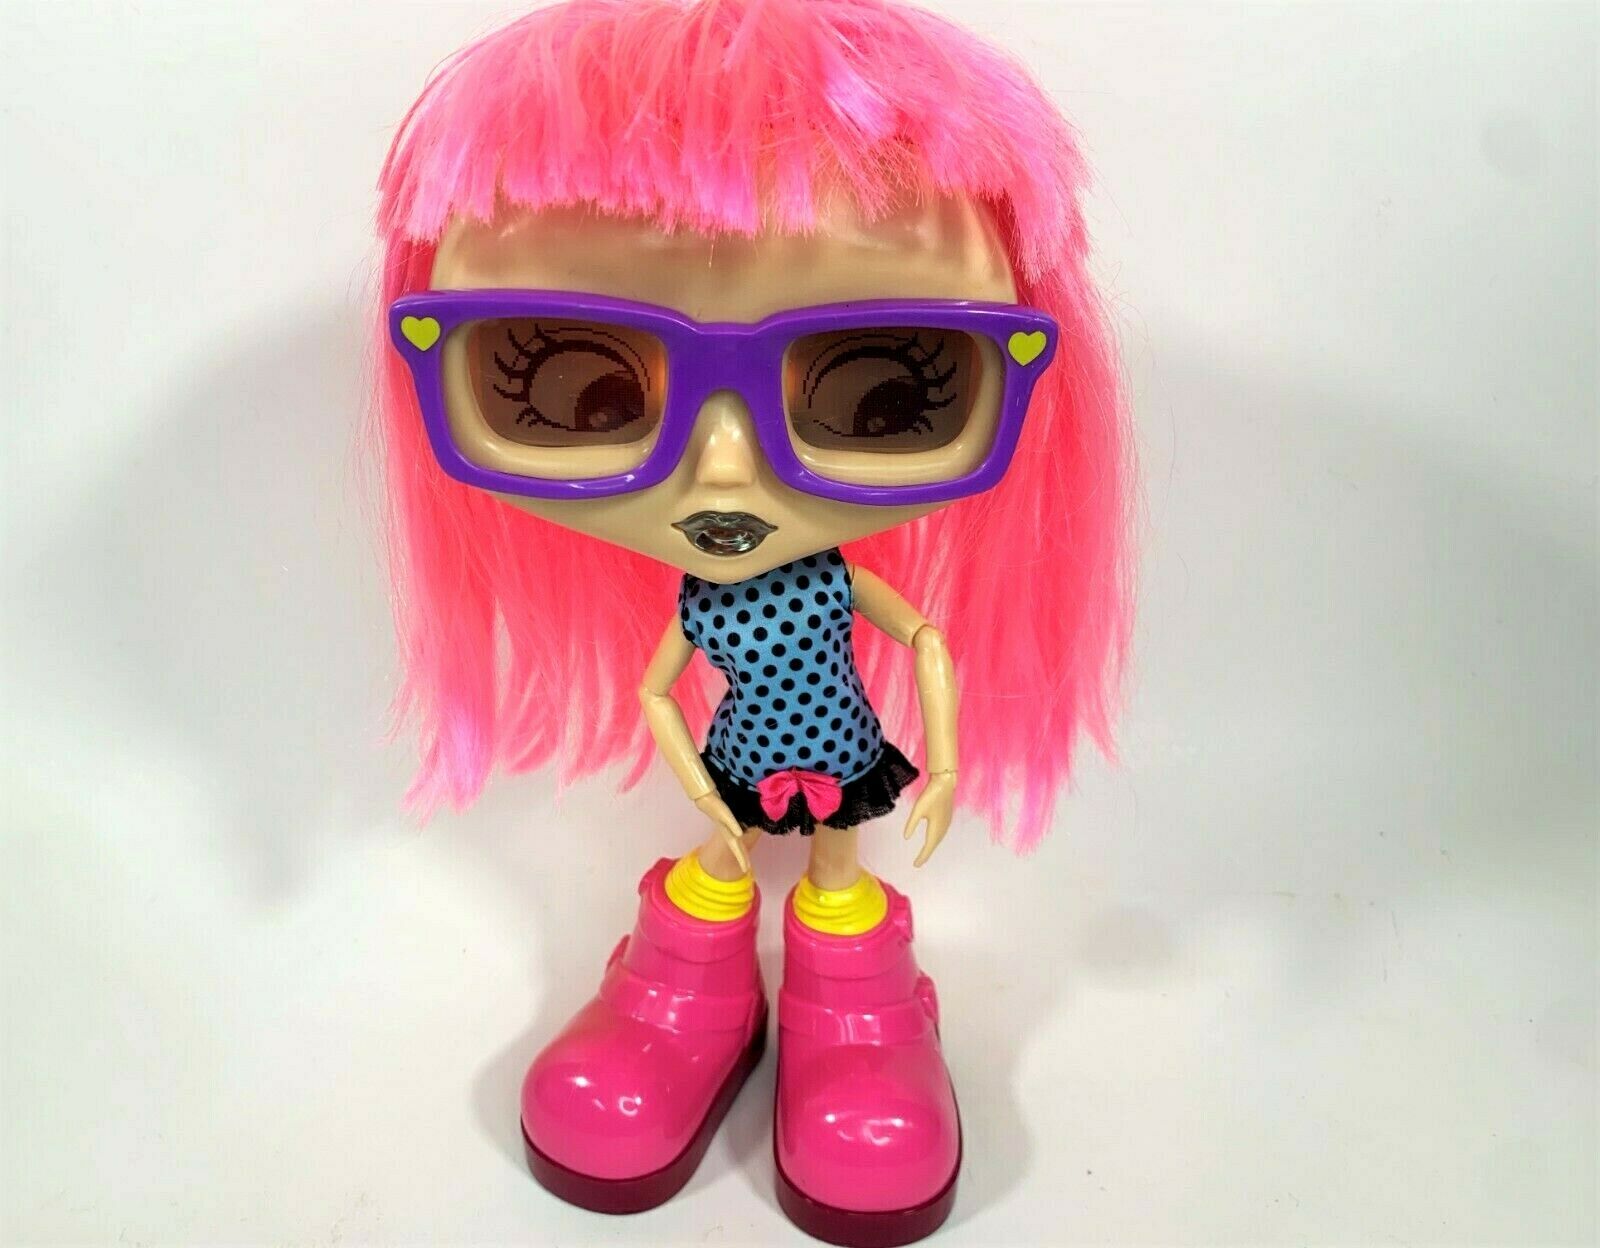 Chatsters "gabby" Interactive Robot Pop Star Doll By Spin Master